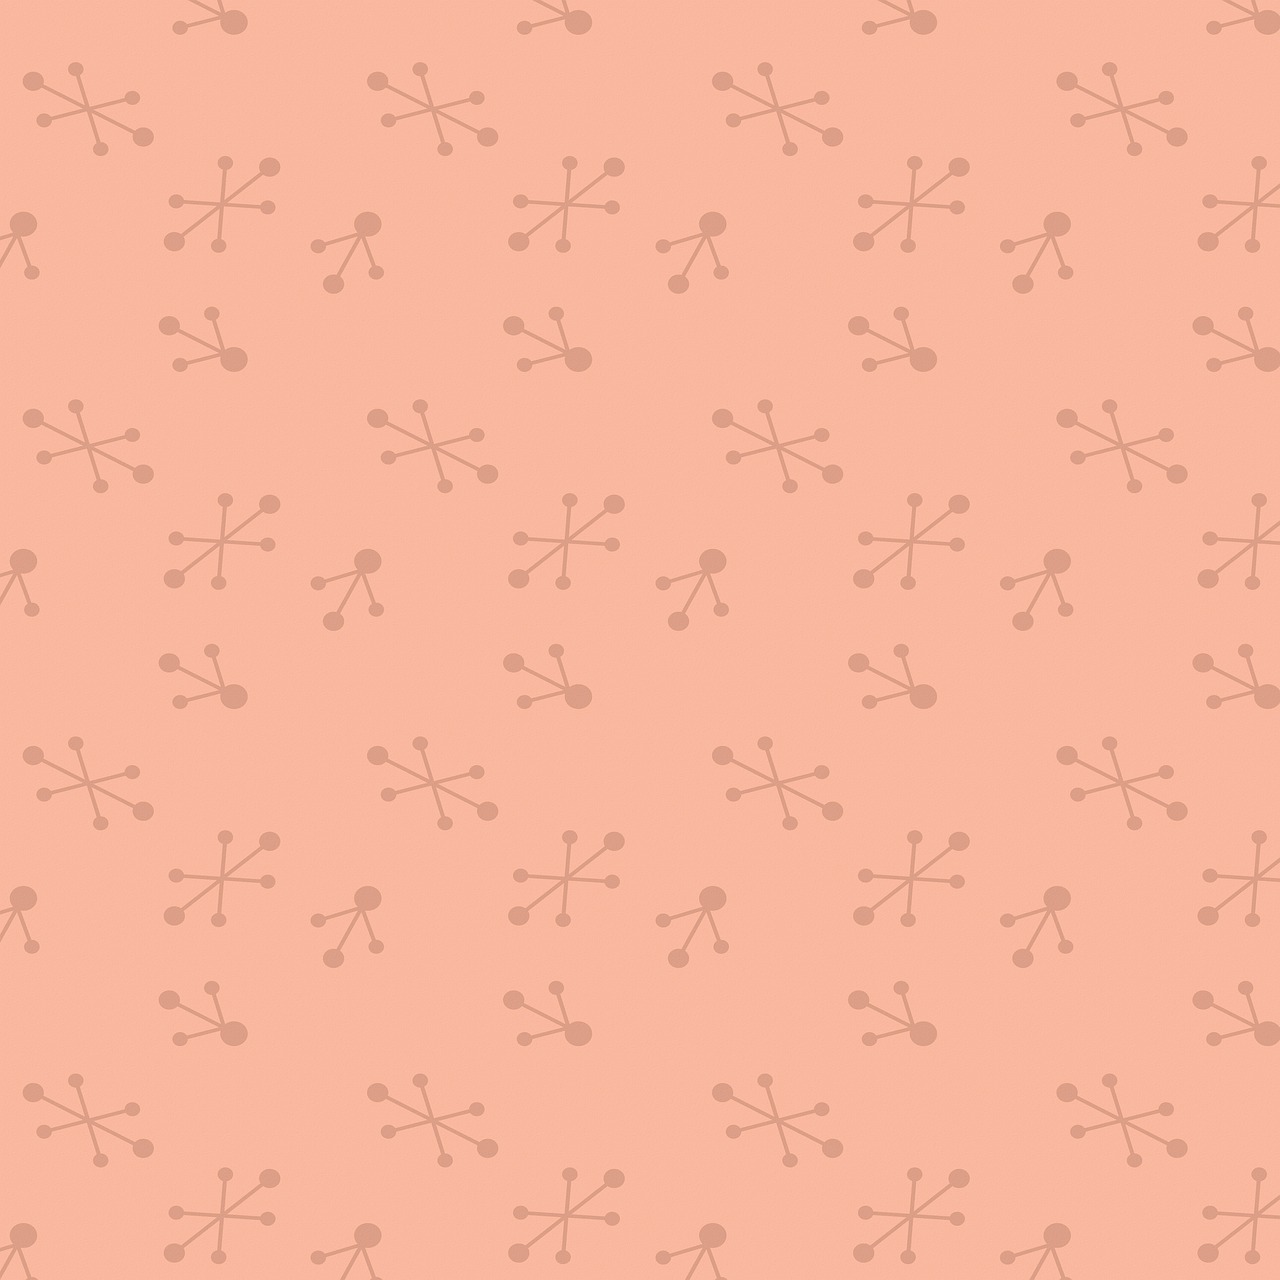 a pattern of circles and dots on a pink background, inspired by Katsushika Ōi, neuron, grainy texturized dusty, arrows, in shades of peach